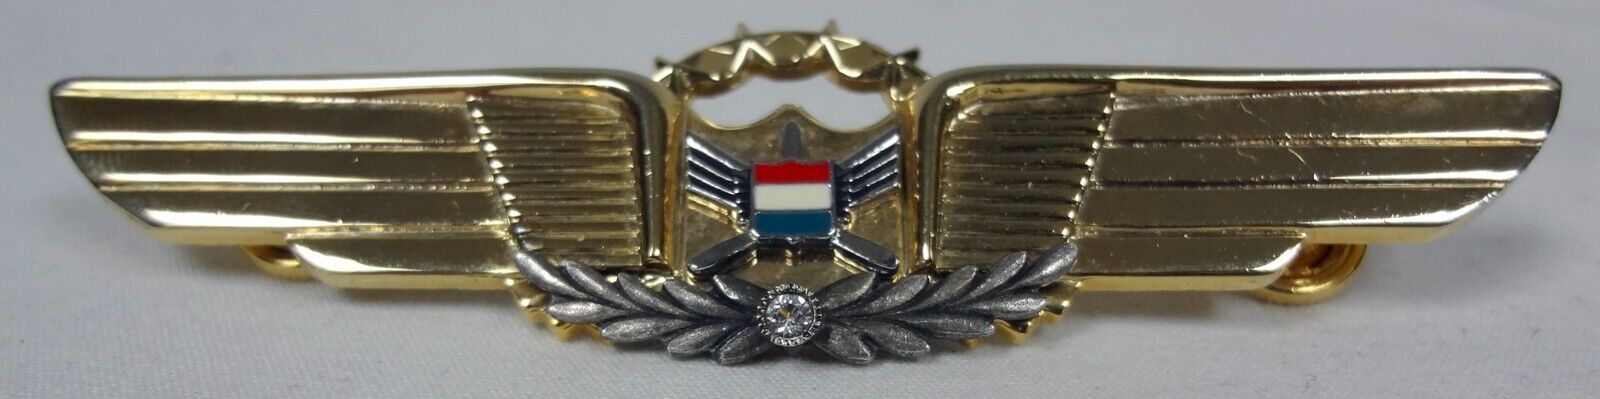 RARE Vintage United States Airlines Pilot Wings 1 Star Stone Pin